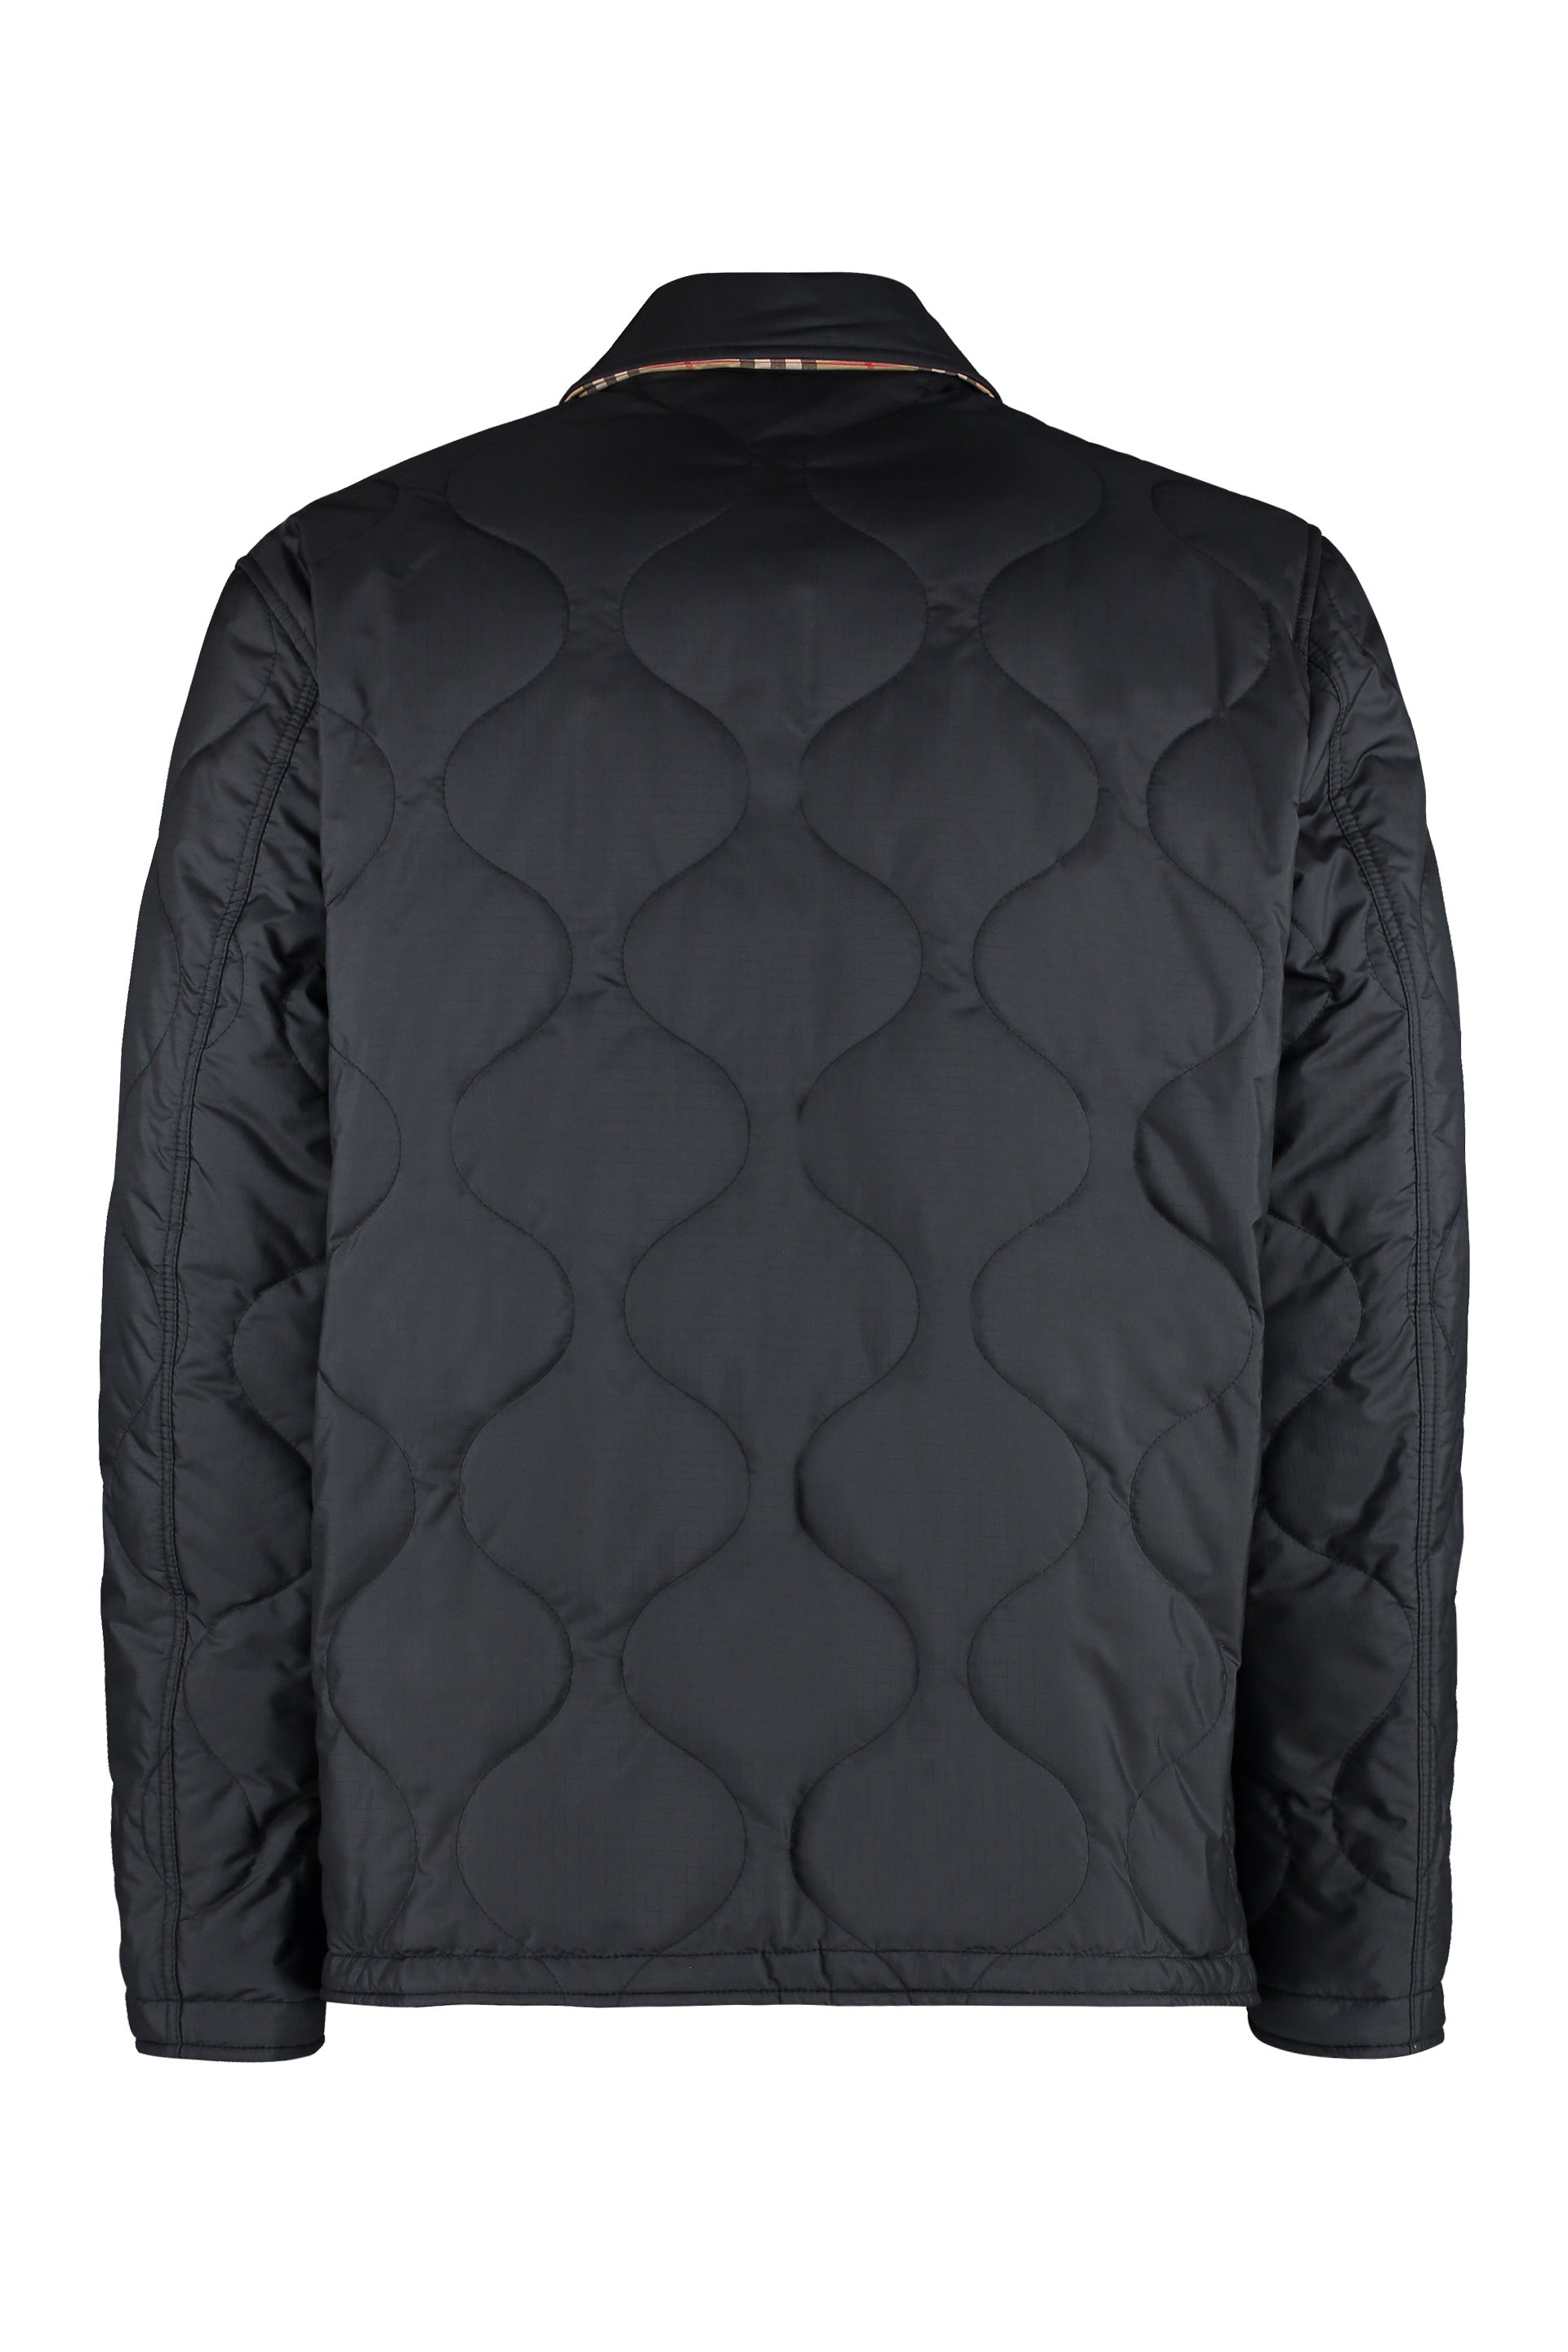 Shop Burberry Reversible Quilted Jacket For Men In Black